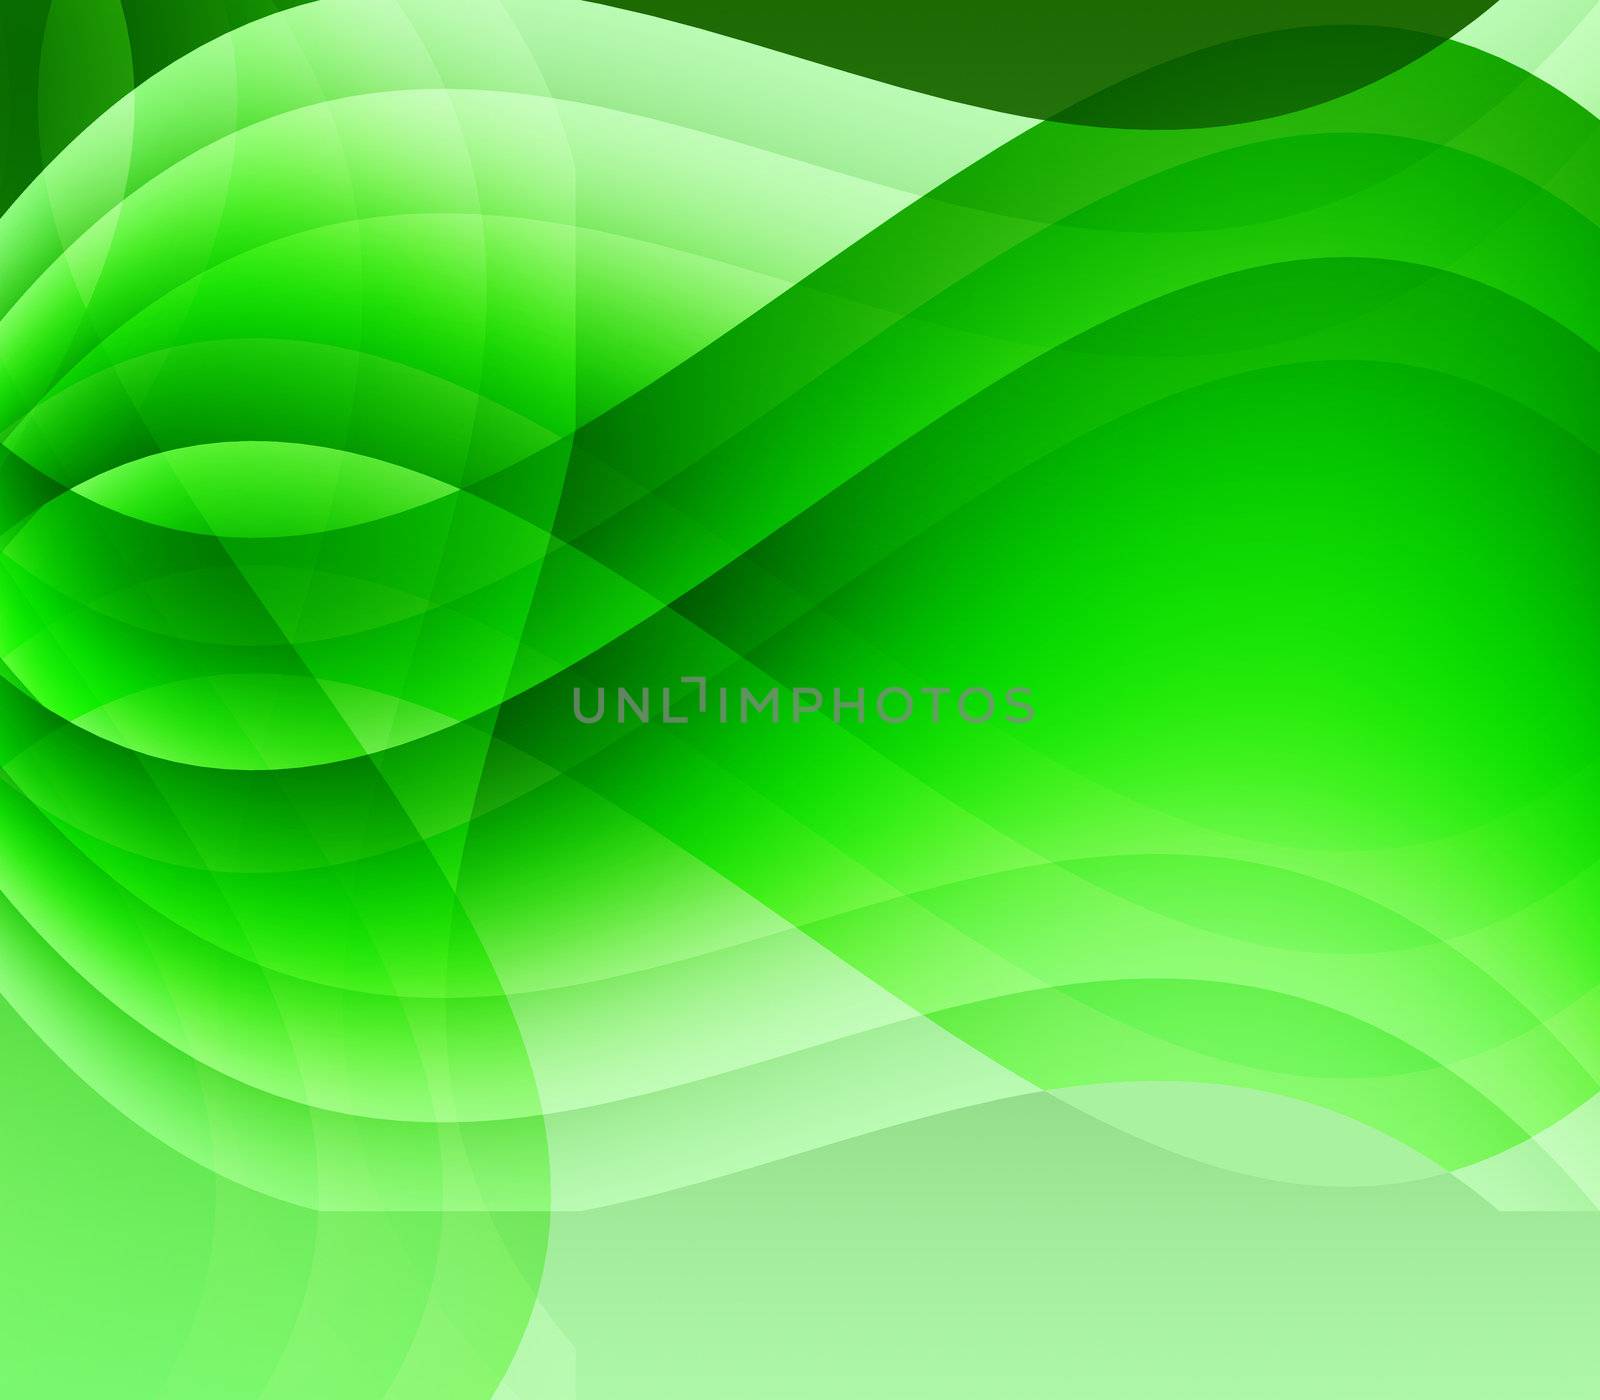 A 3d swirling pattern makes a great background